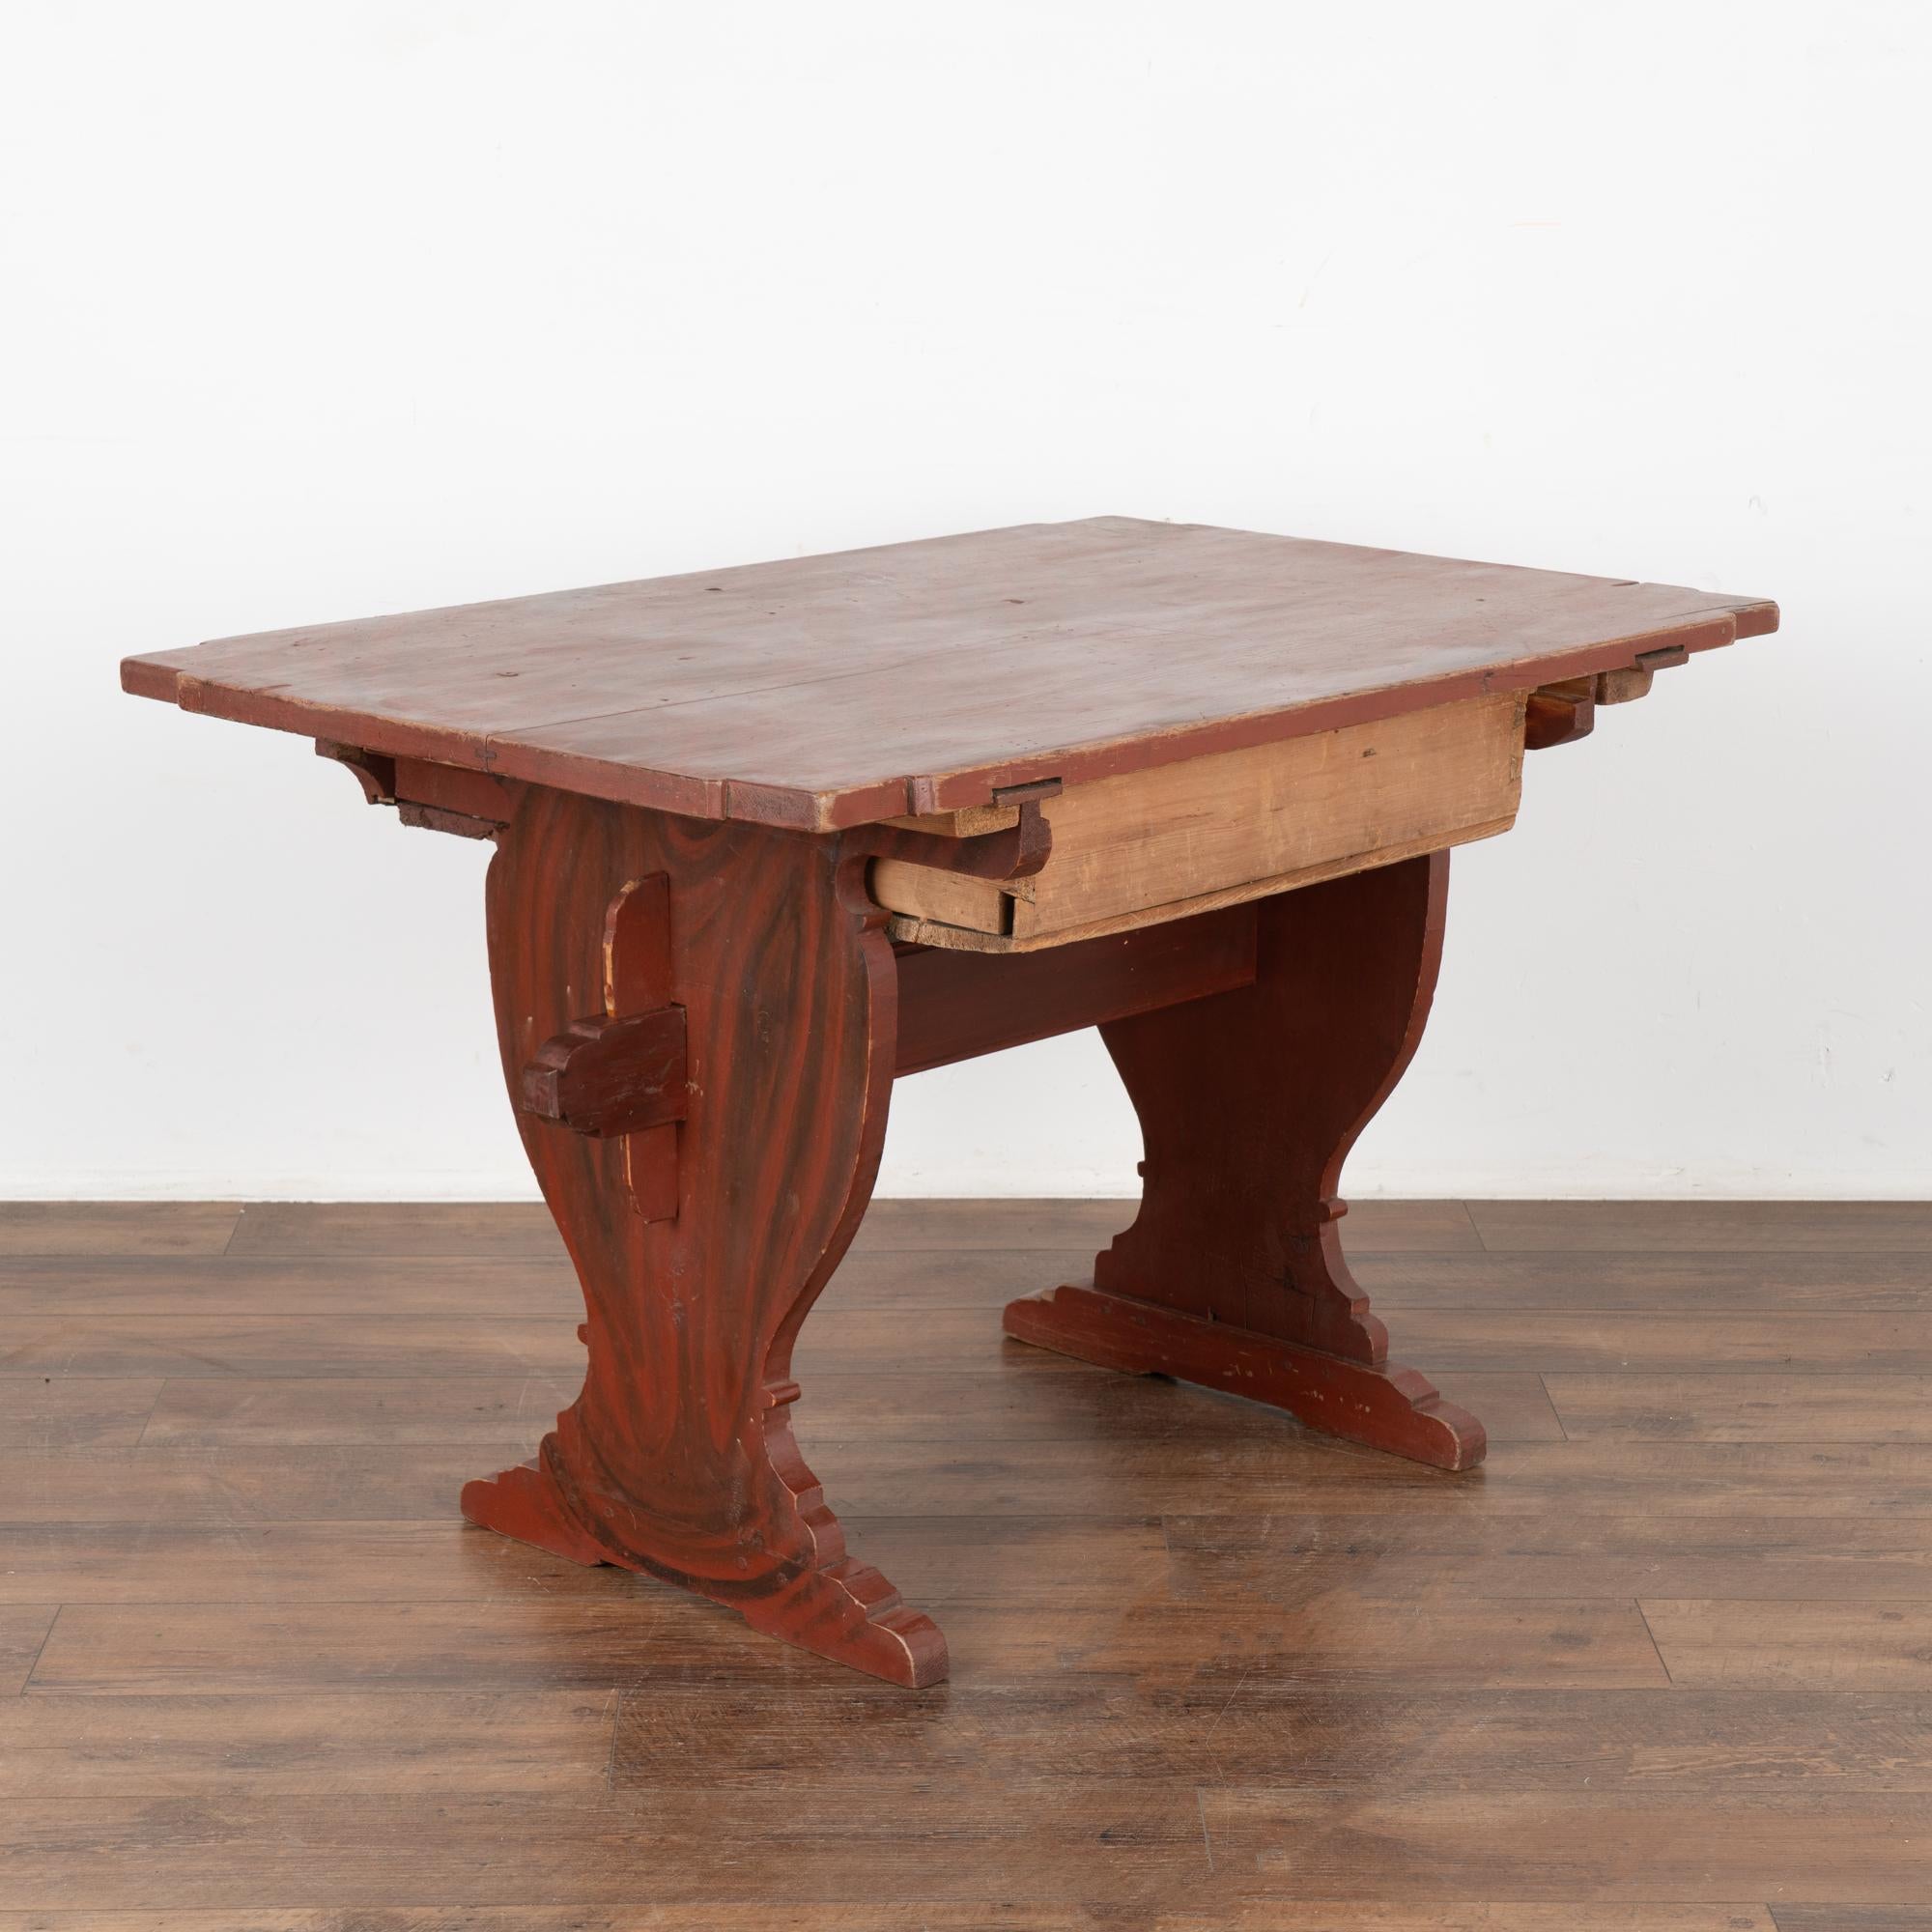 Original Red Painted Farm Table With Drawer, Sweden circa 1820-40 For Sale 5